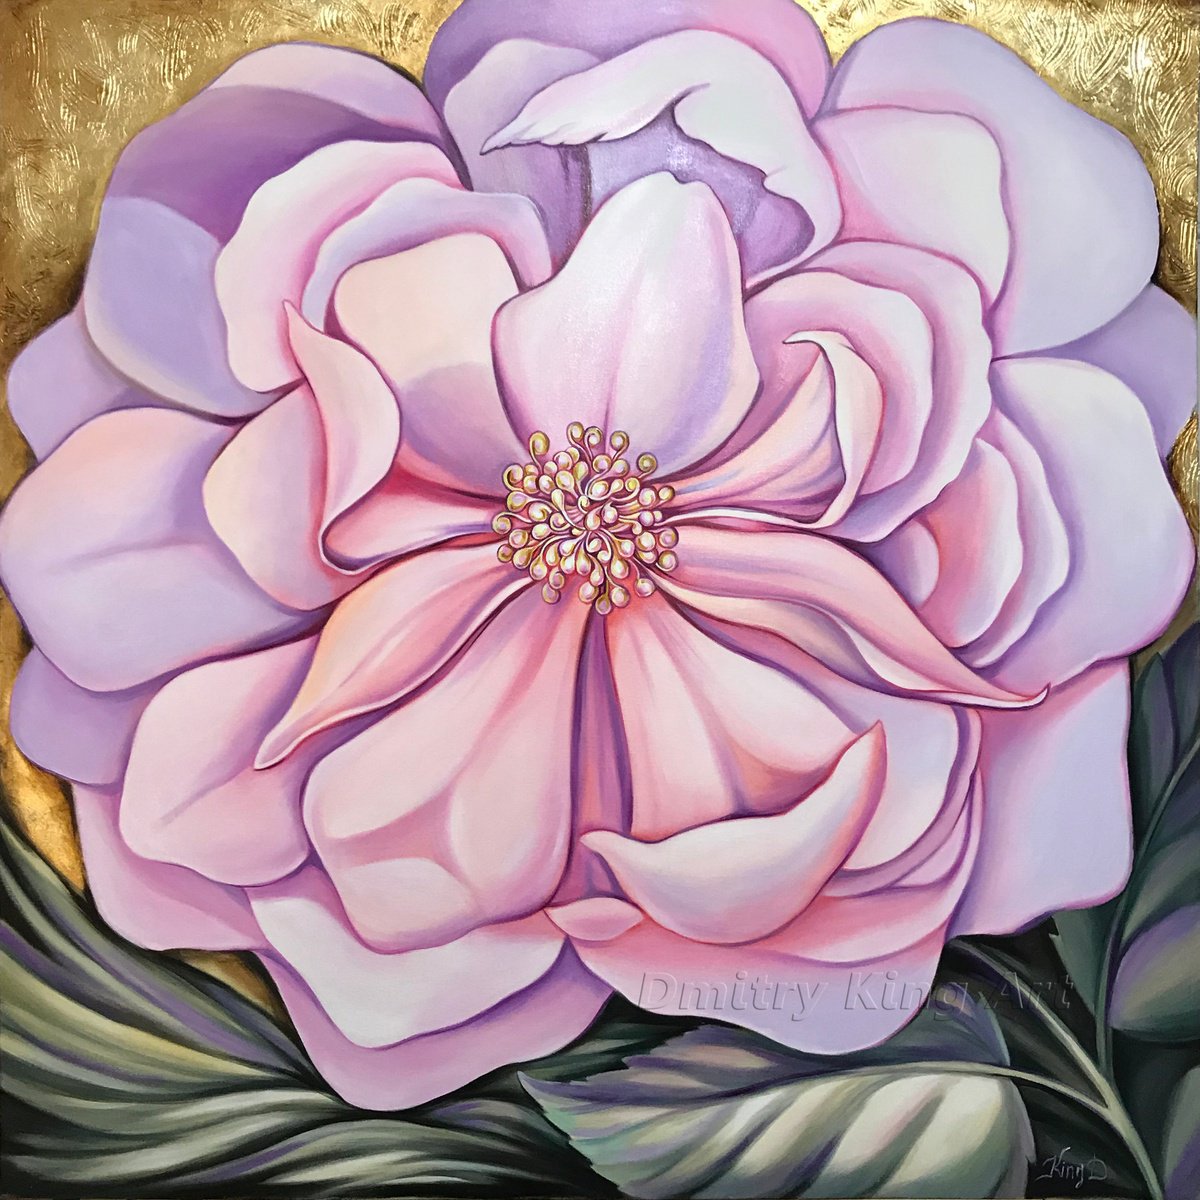 Large Pink Rose Flower Oil Painting by Dmitry King